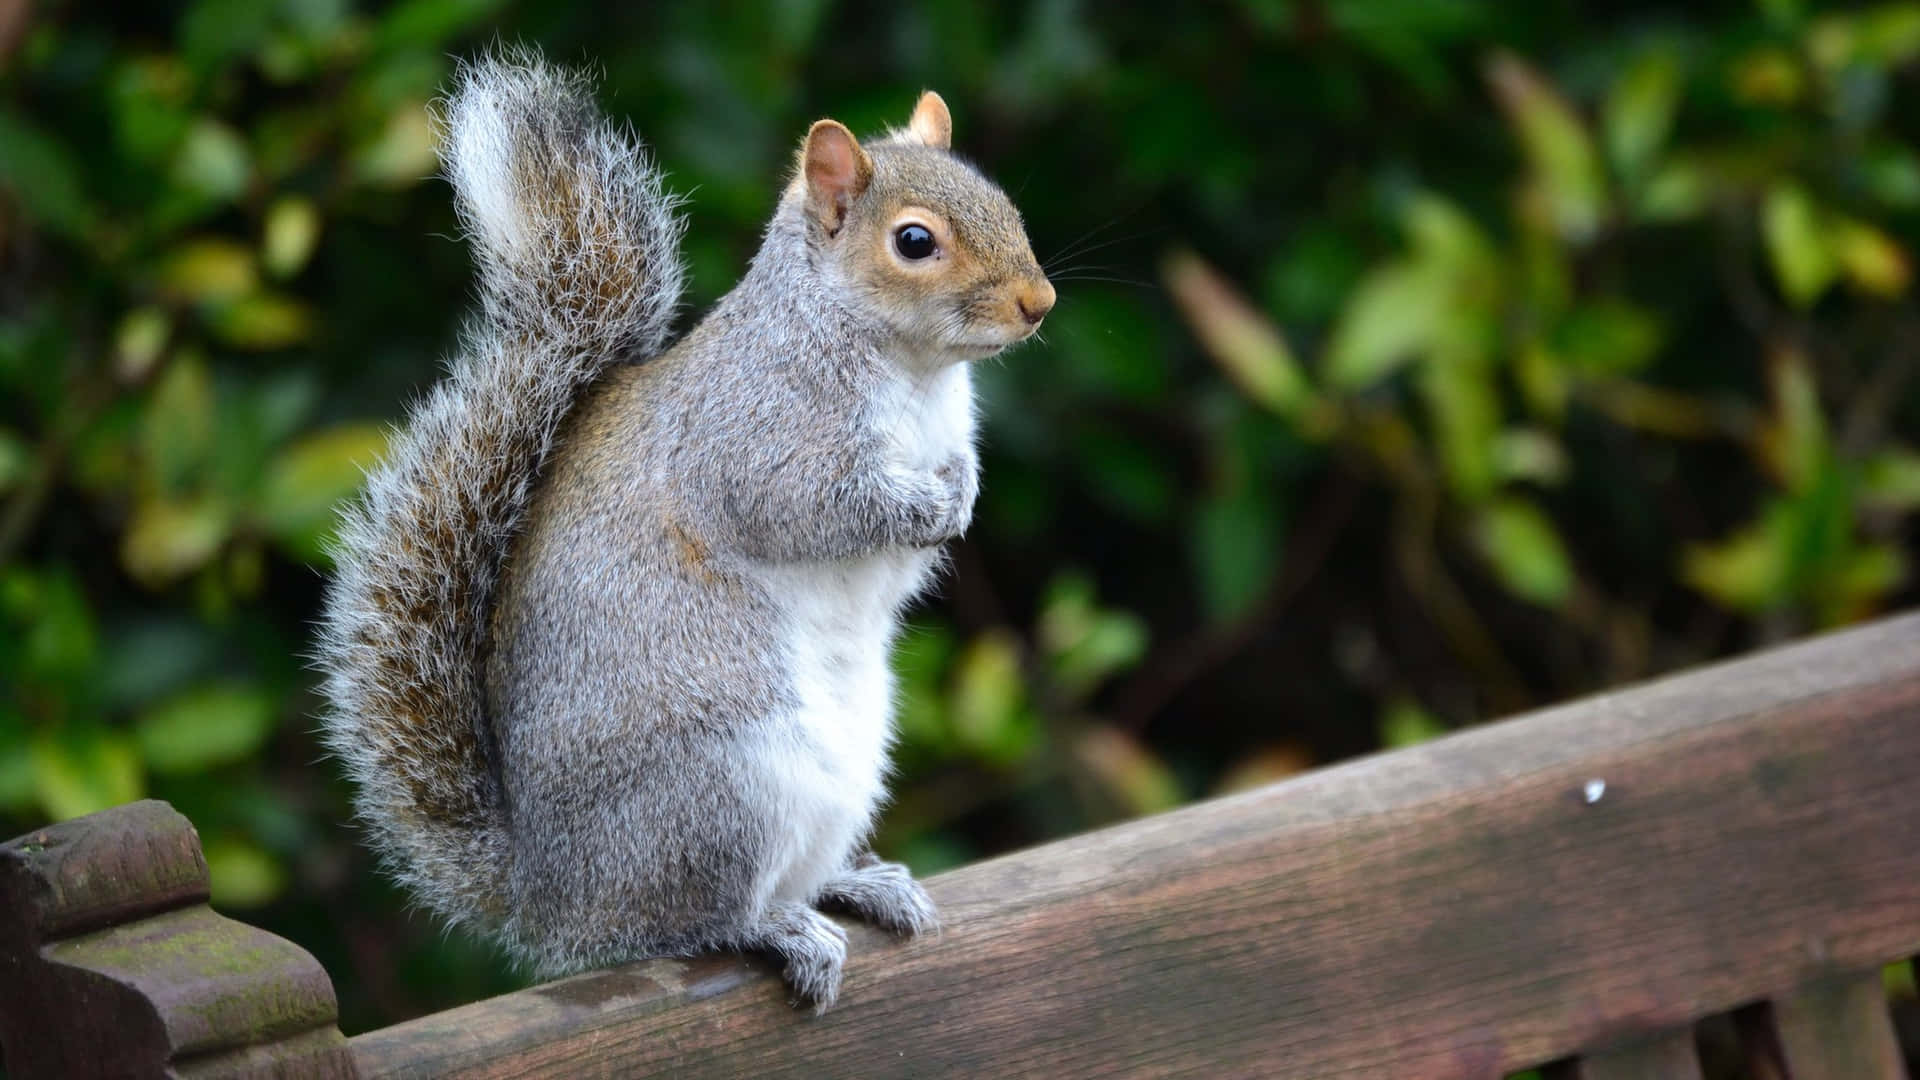 A fluffy squirrel gathers nuts for winter.